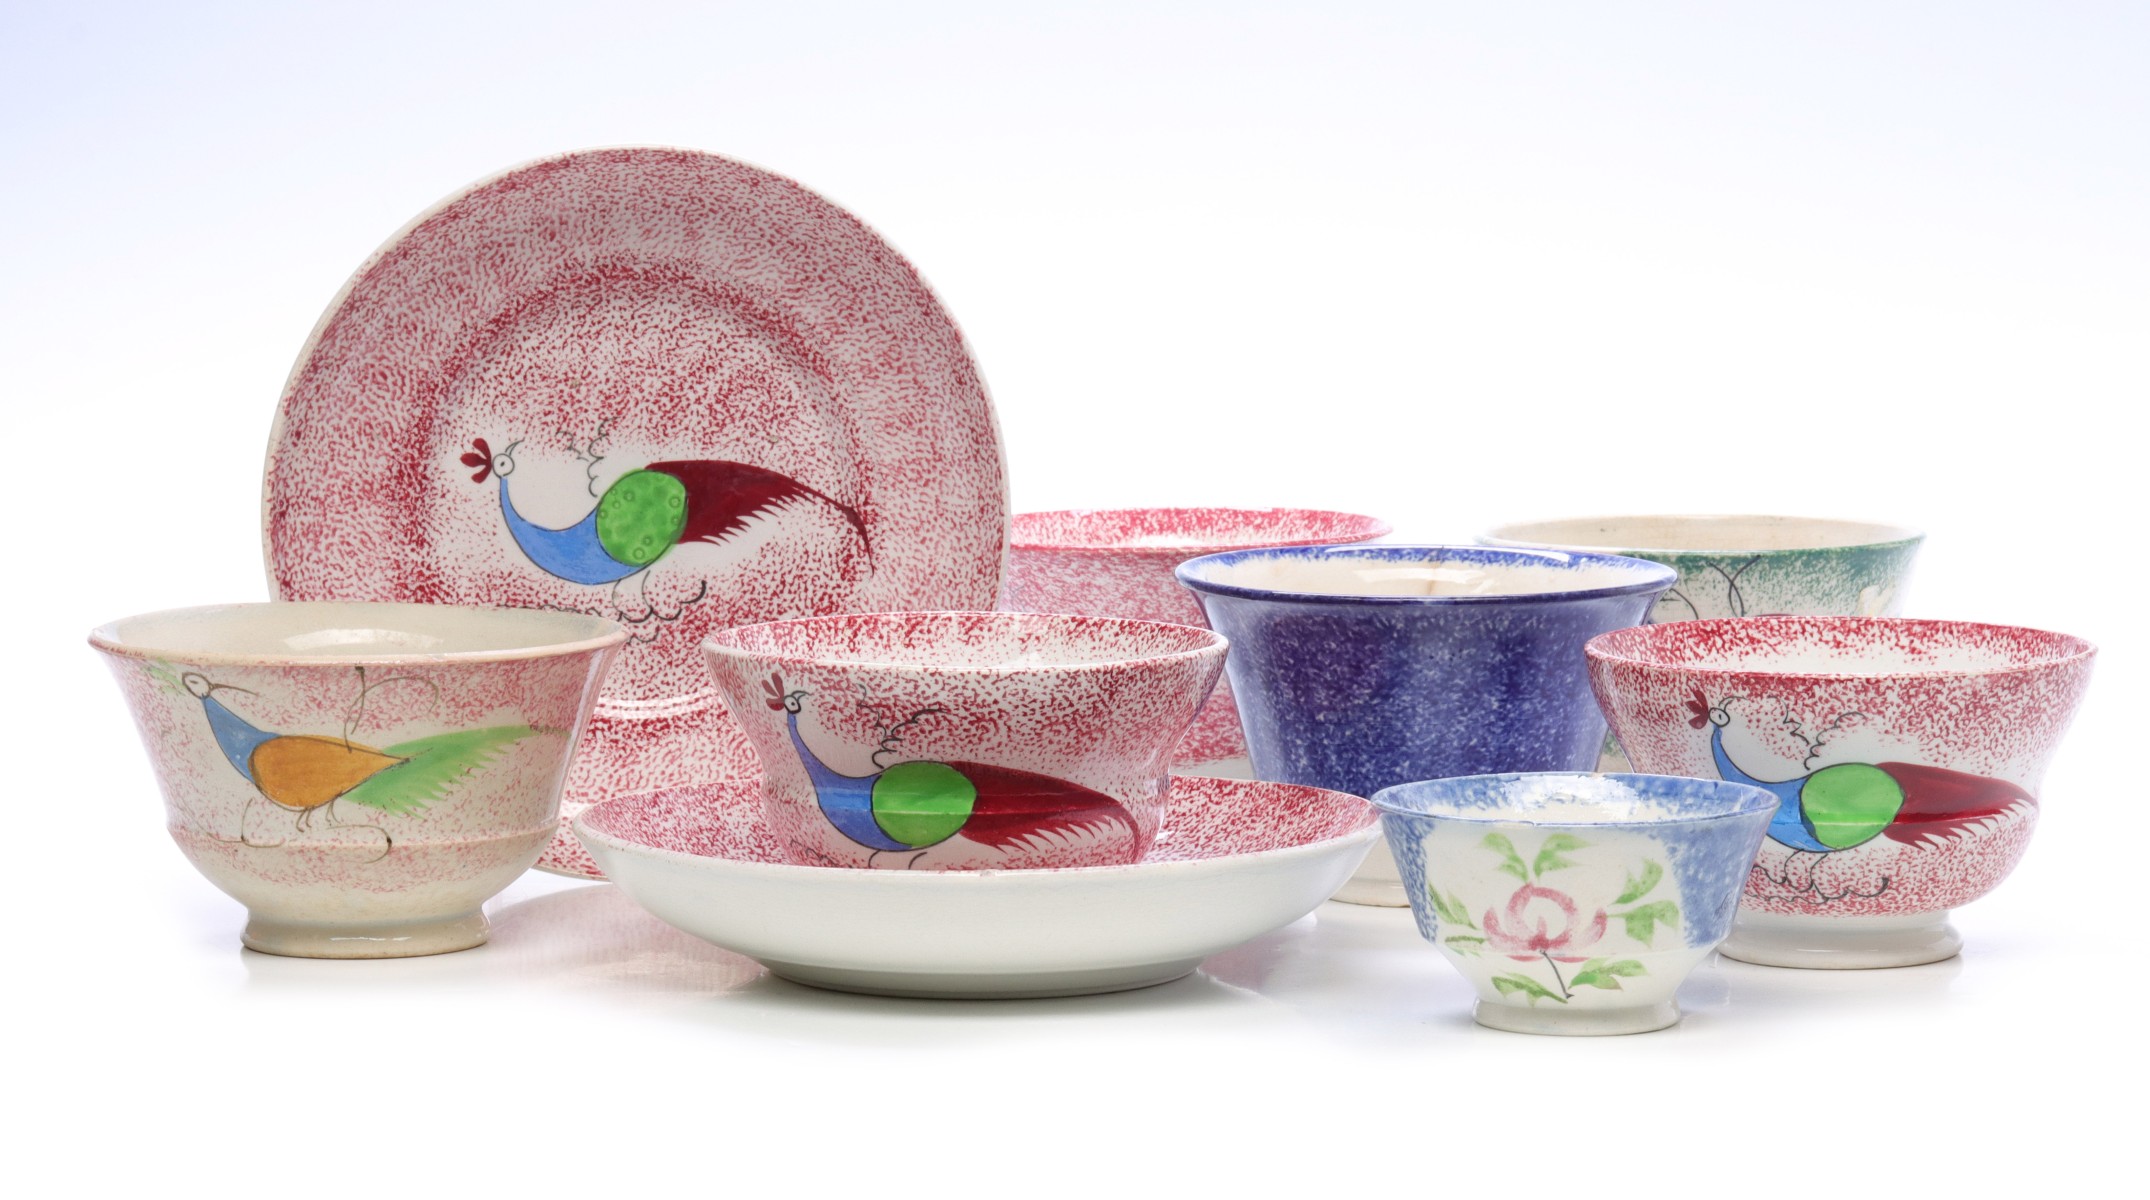 GREEN AND RED PEAFOWL DECORATED SPATTERWARE